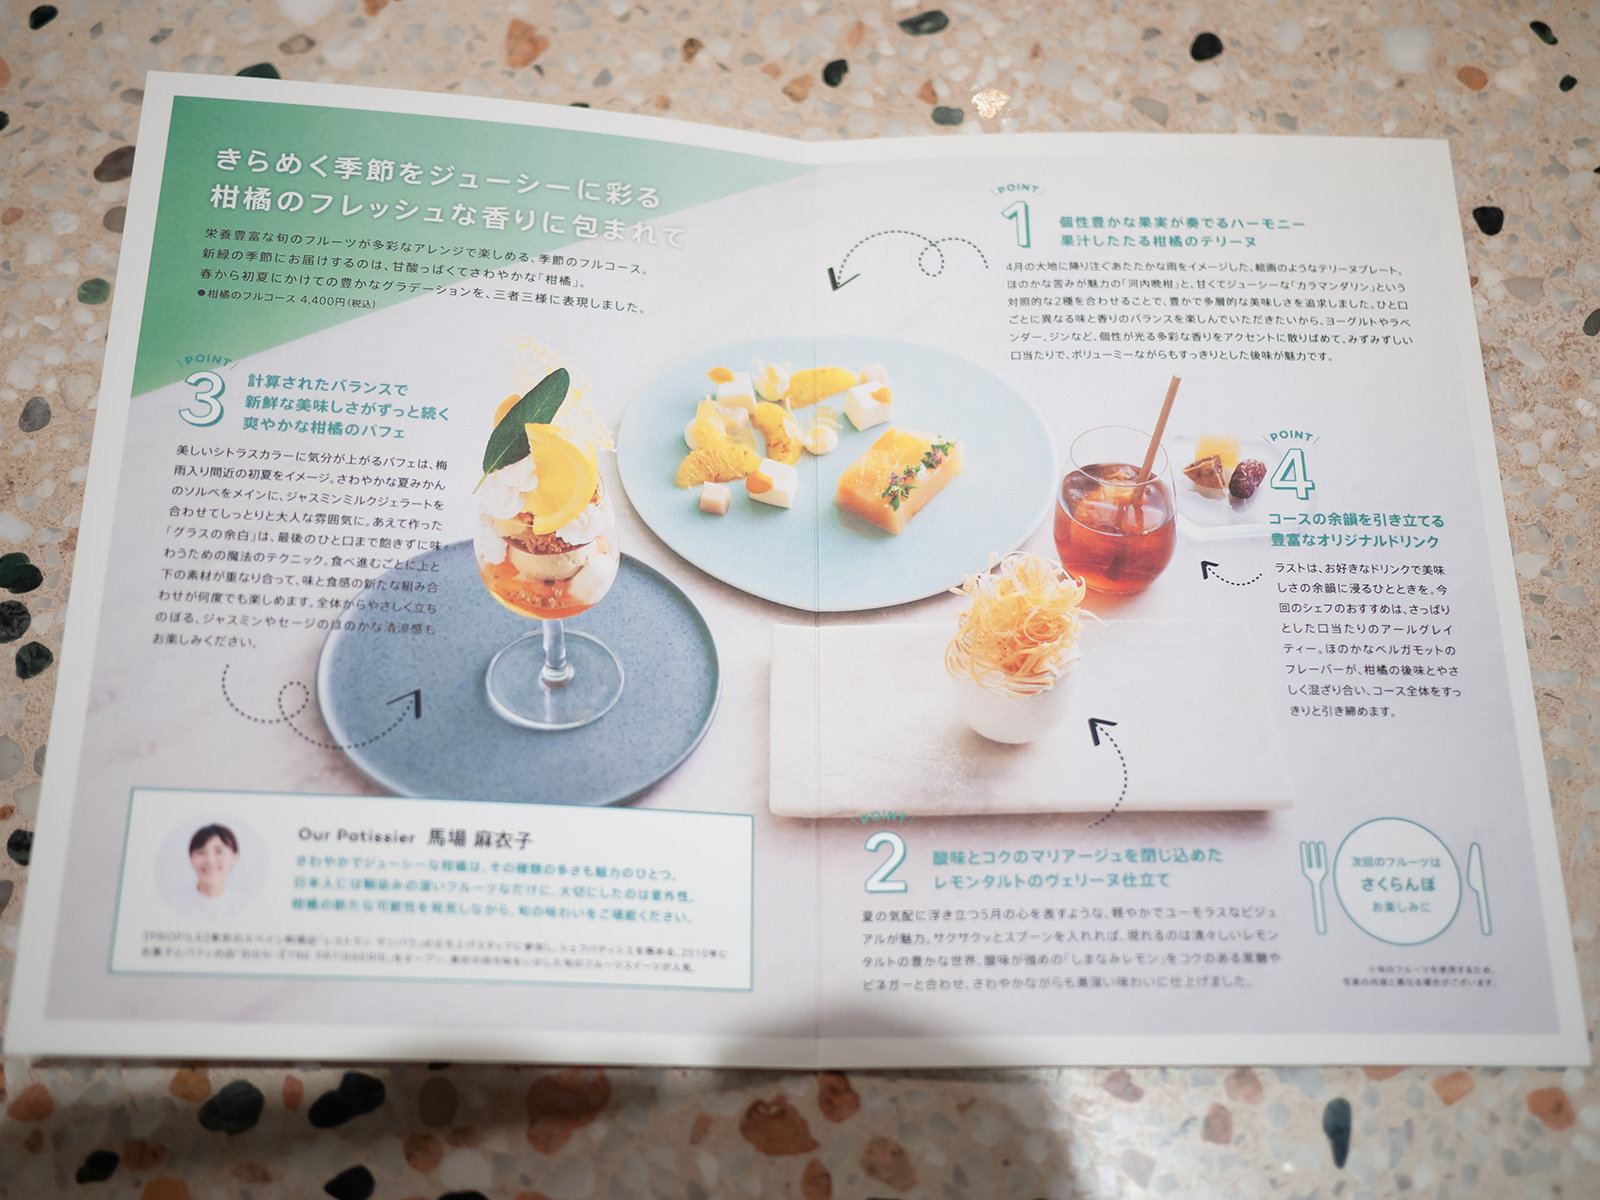 Beauty Connection Ginza Fruits Salonのメニュー